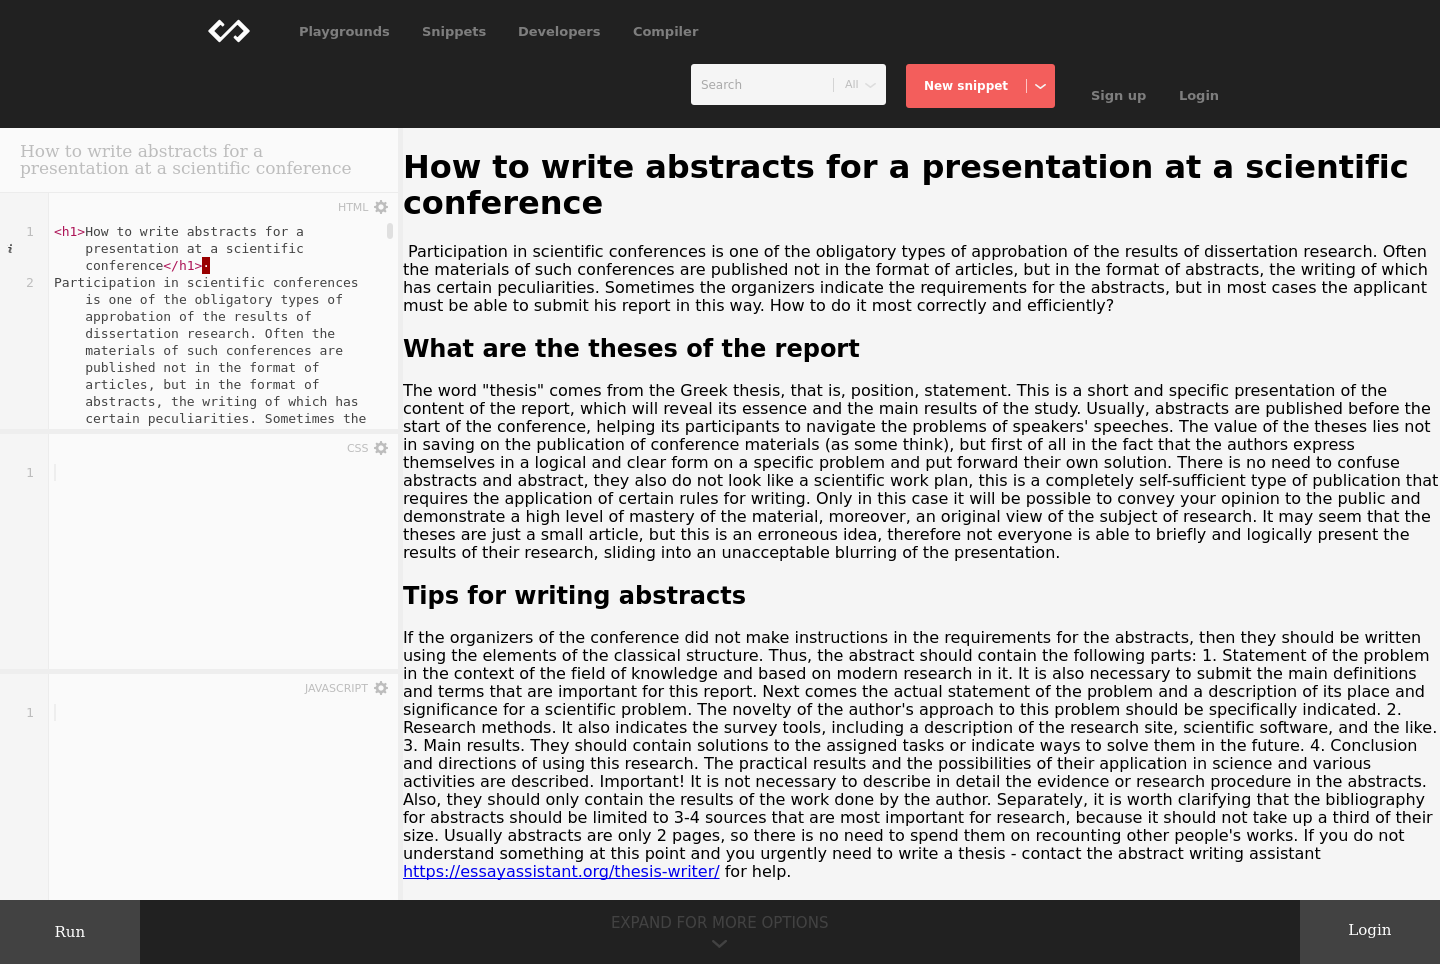 example abstract for conference presentation